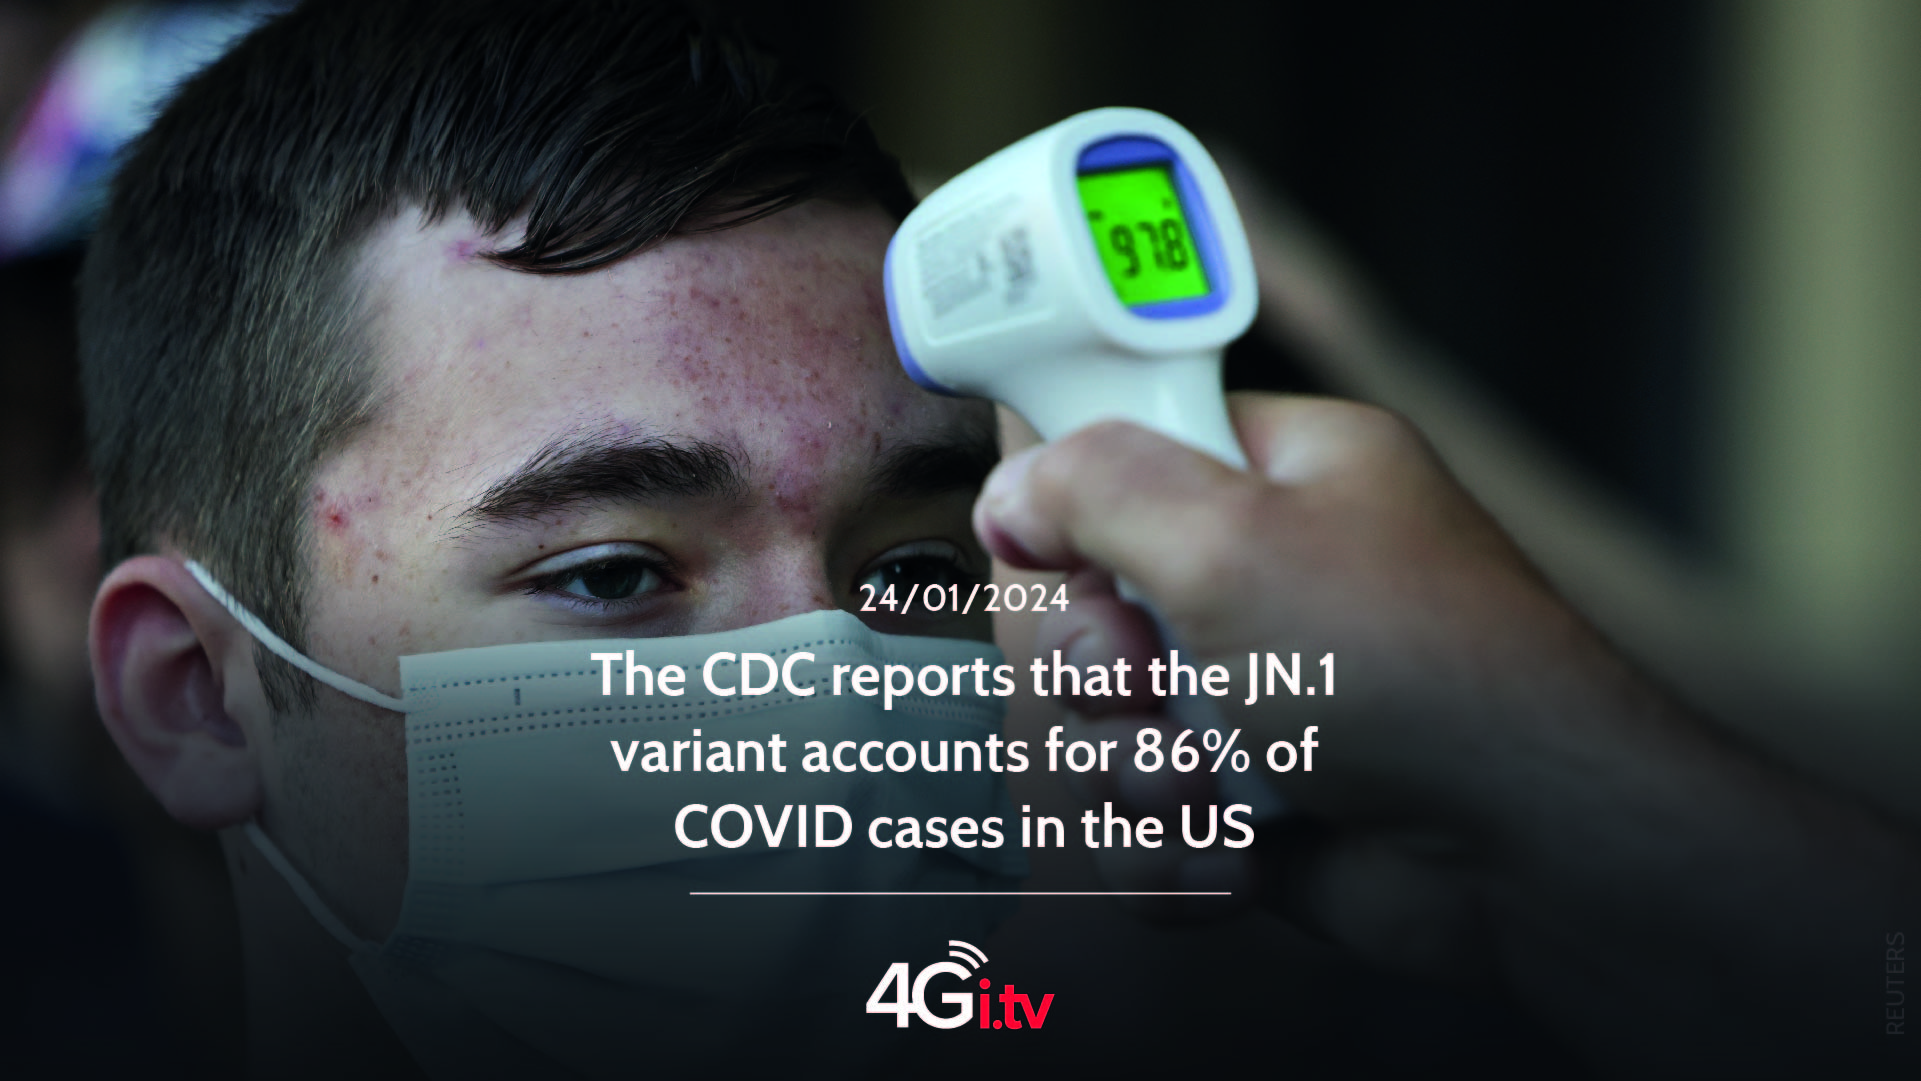 Подробнее о статье The CDC reports that the JN.1 variant accounts for 86% of COVID cases in the US